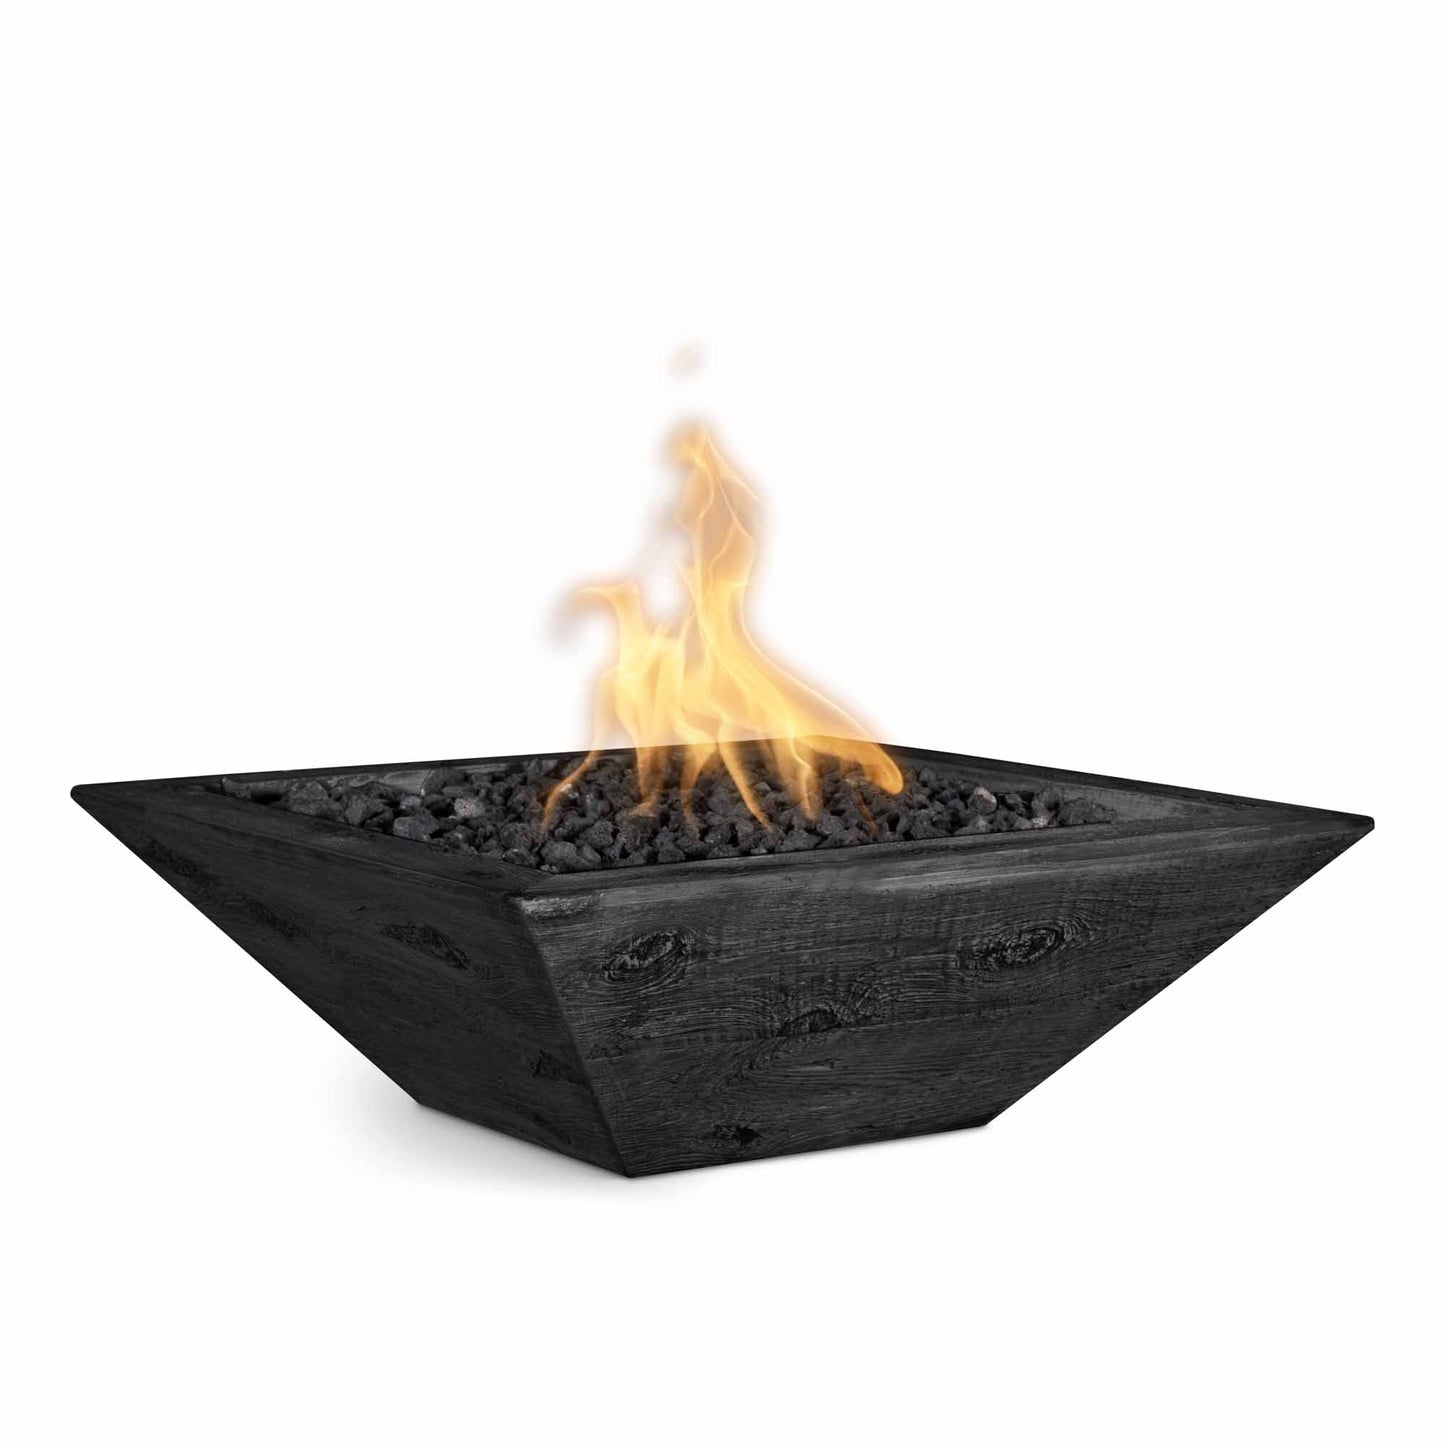 The Outdoor Plus Square Maya 30" Ivory Wood Grain Natural Gas Fire Bowl with Match Lit with Flame Sense Ignition